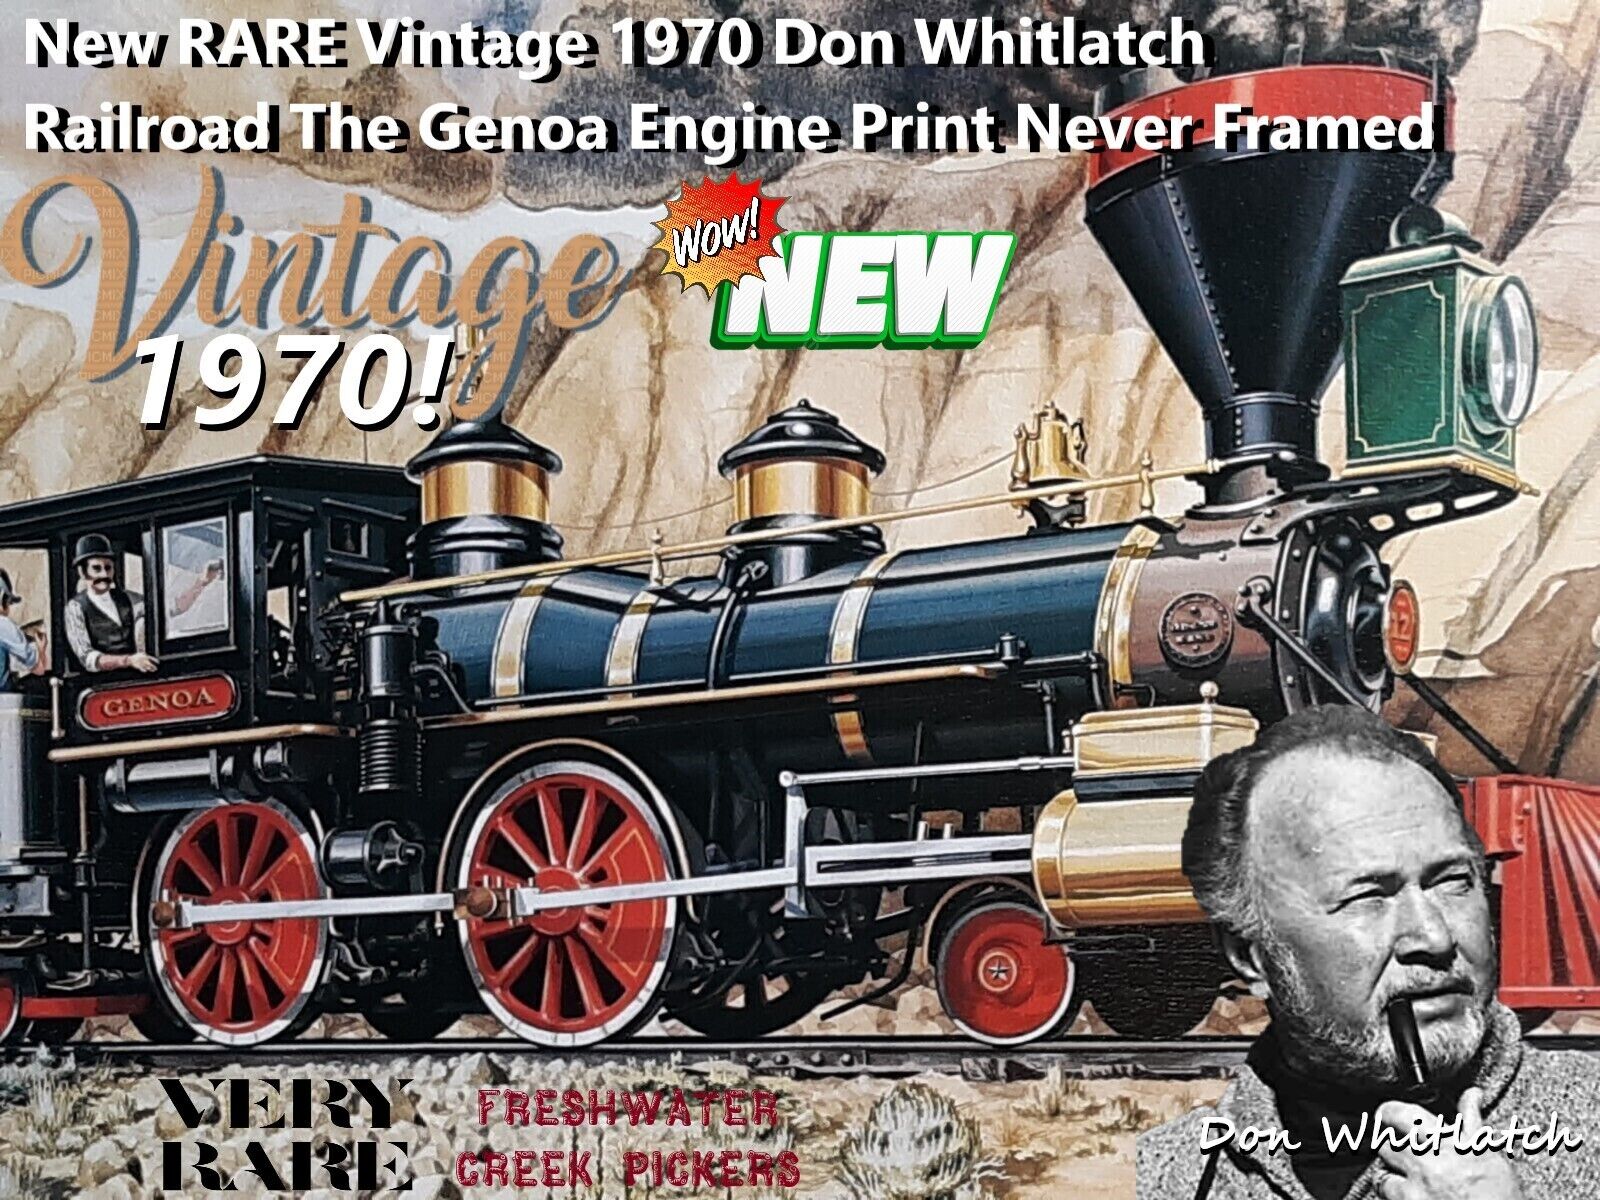 New RARE Vintage 1970 Don Whitlatch Railroad The Genoa Engine Print Never Framed